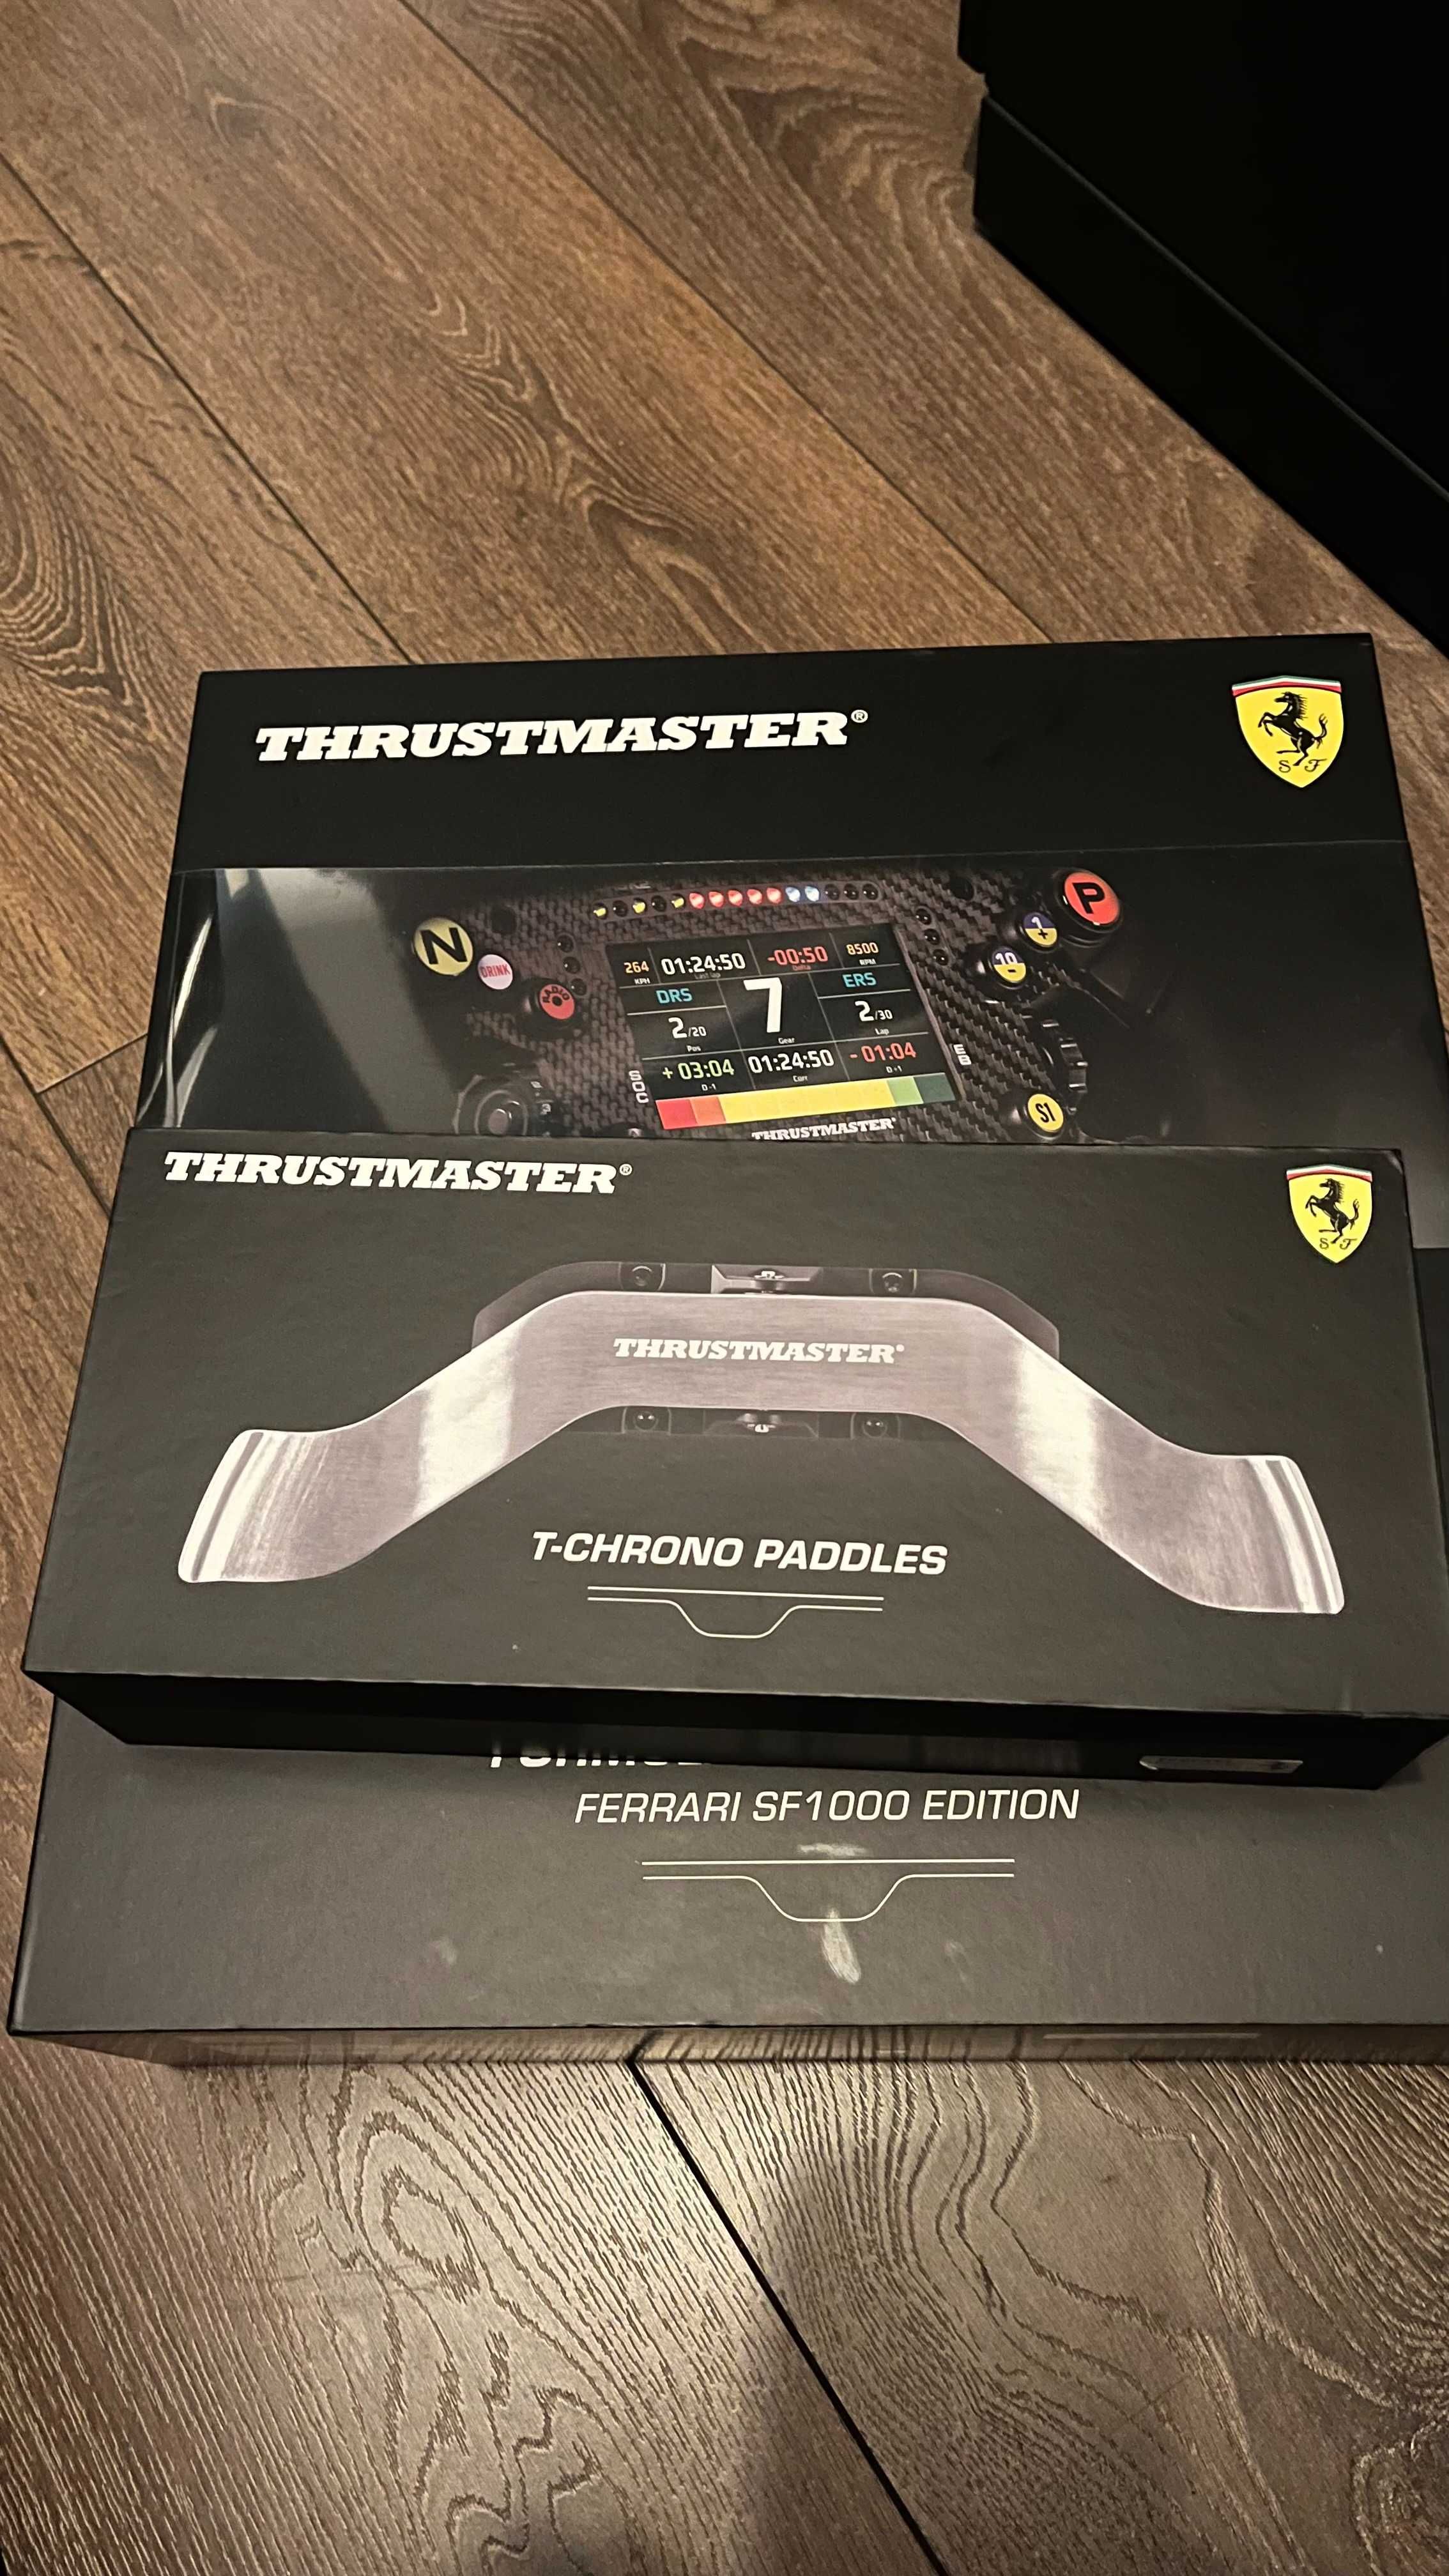 Thrustmaster SF1000 add-on + T-Chrono Paddles